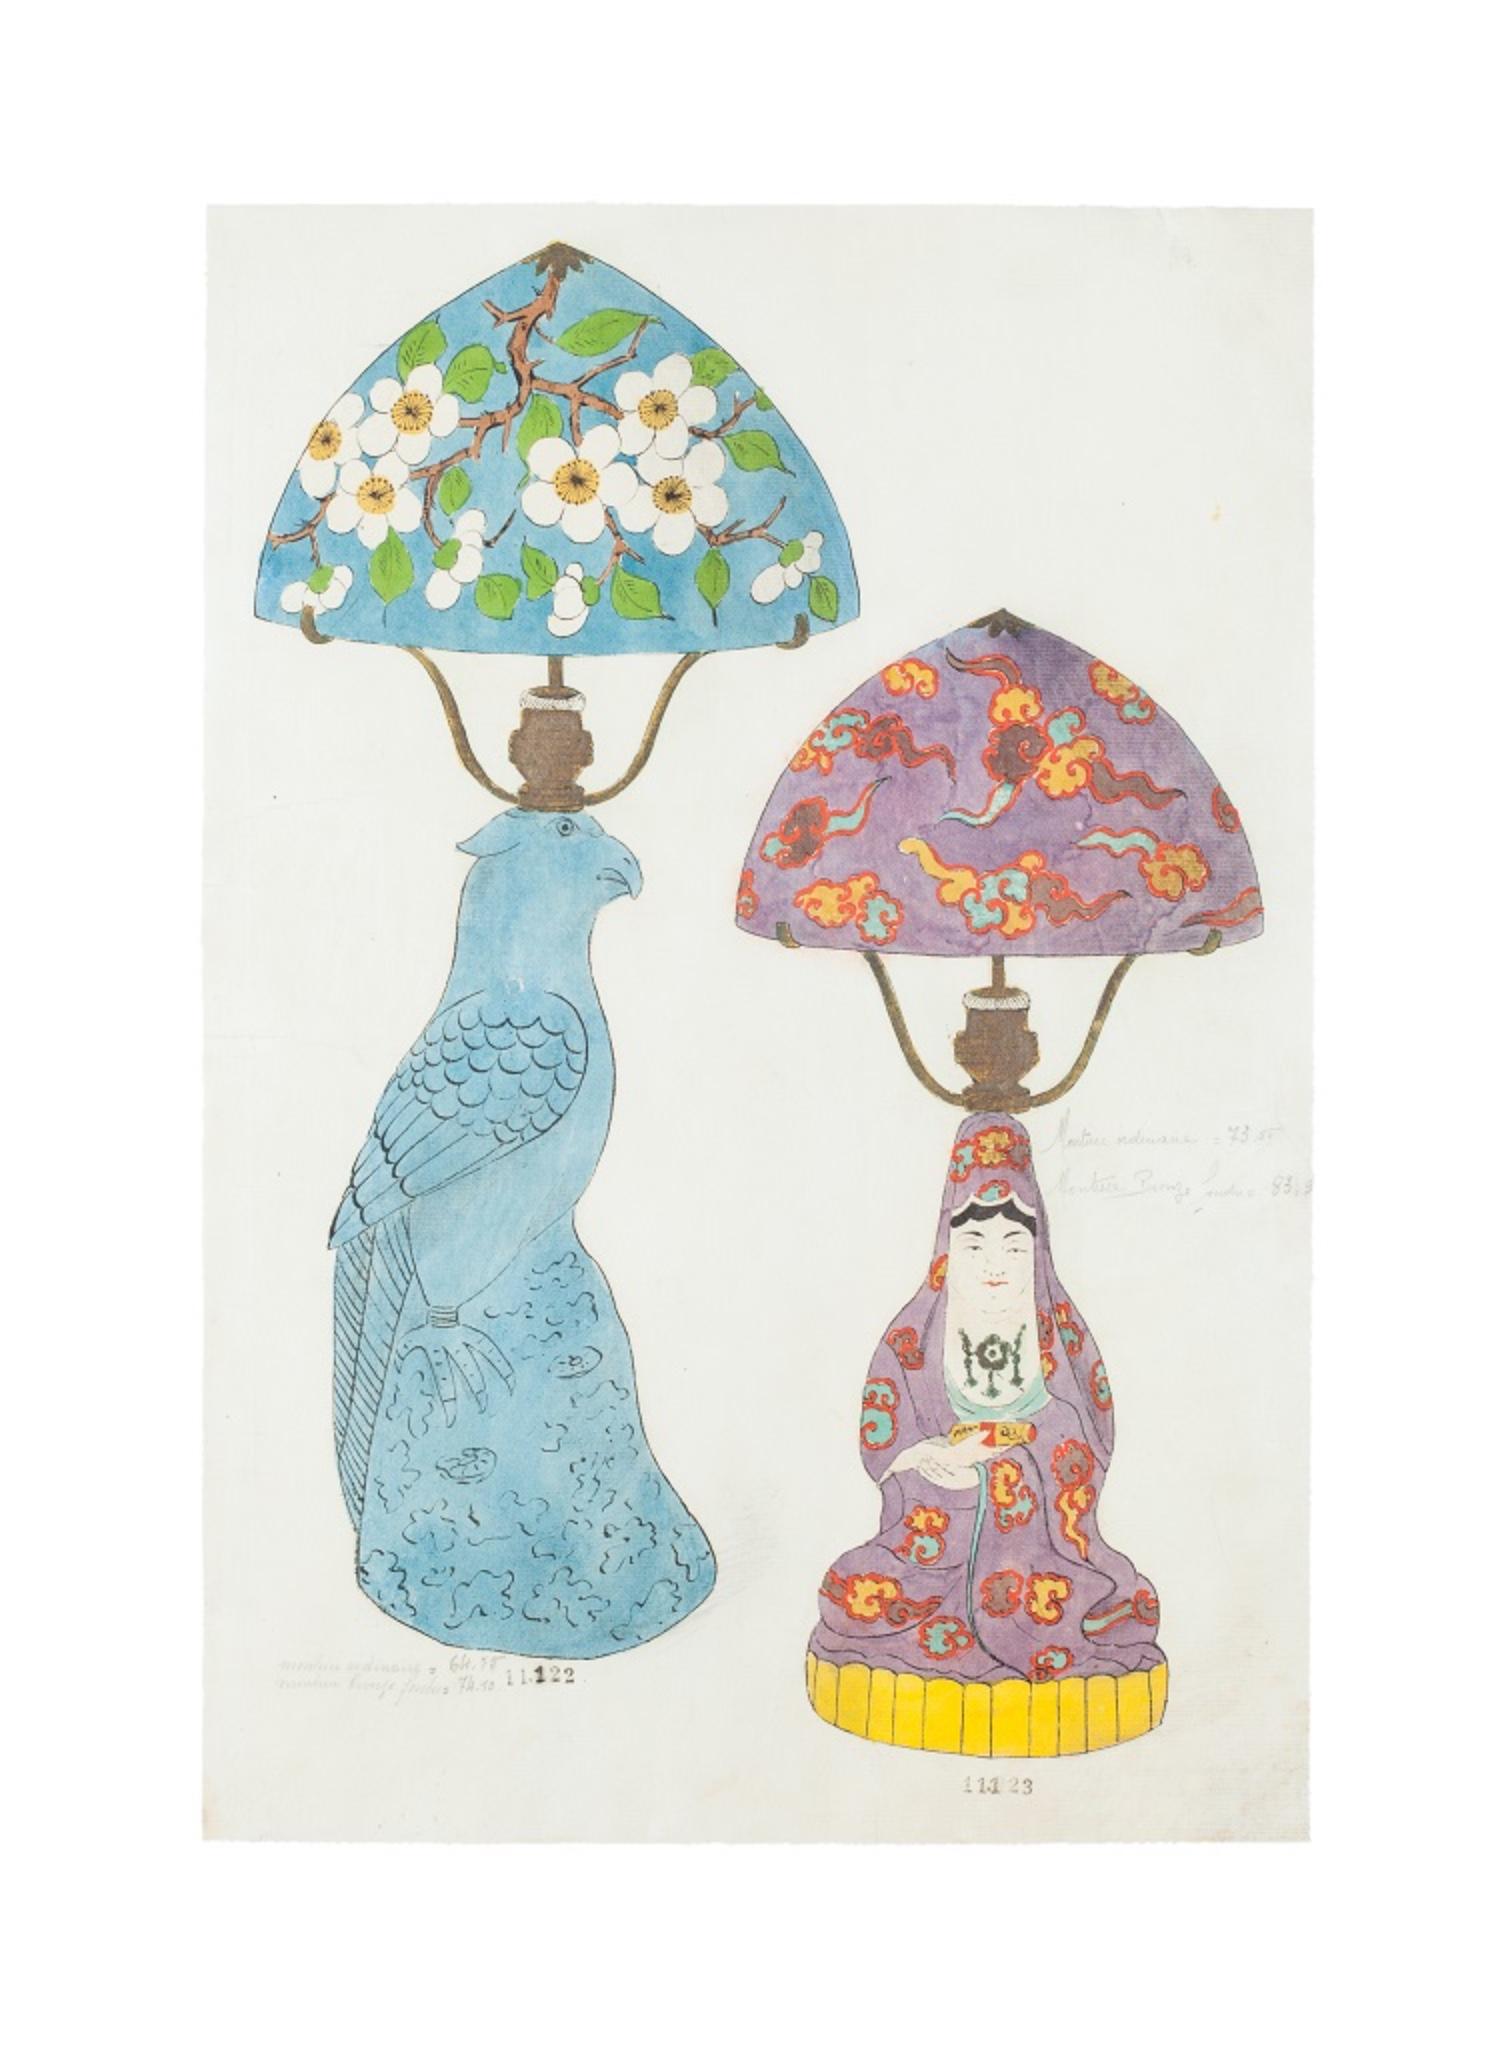 Oriental Lamps - Original Watercolor and Ink Drawing - 19th Century